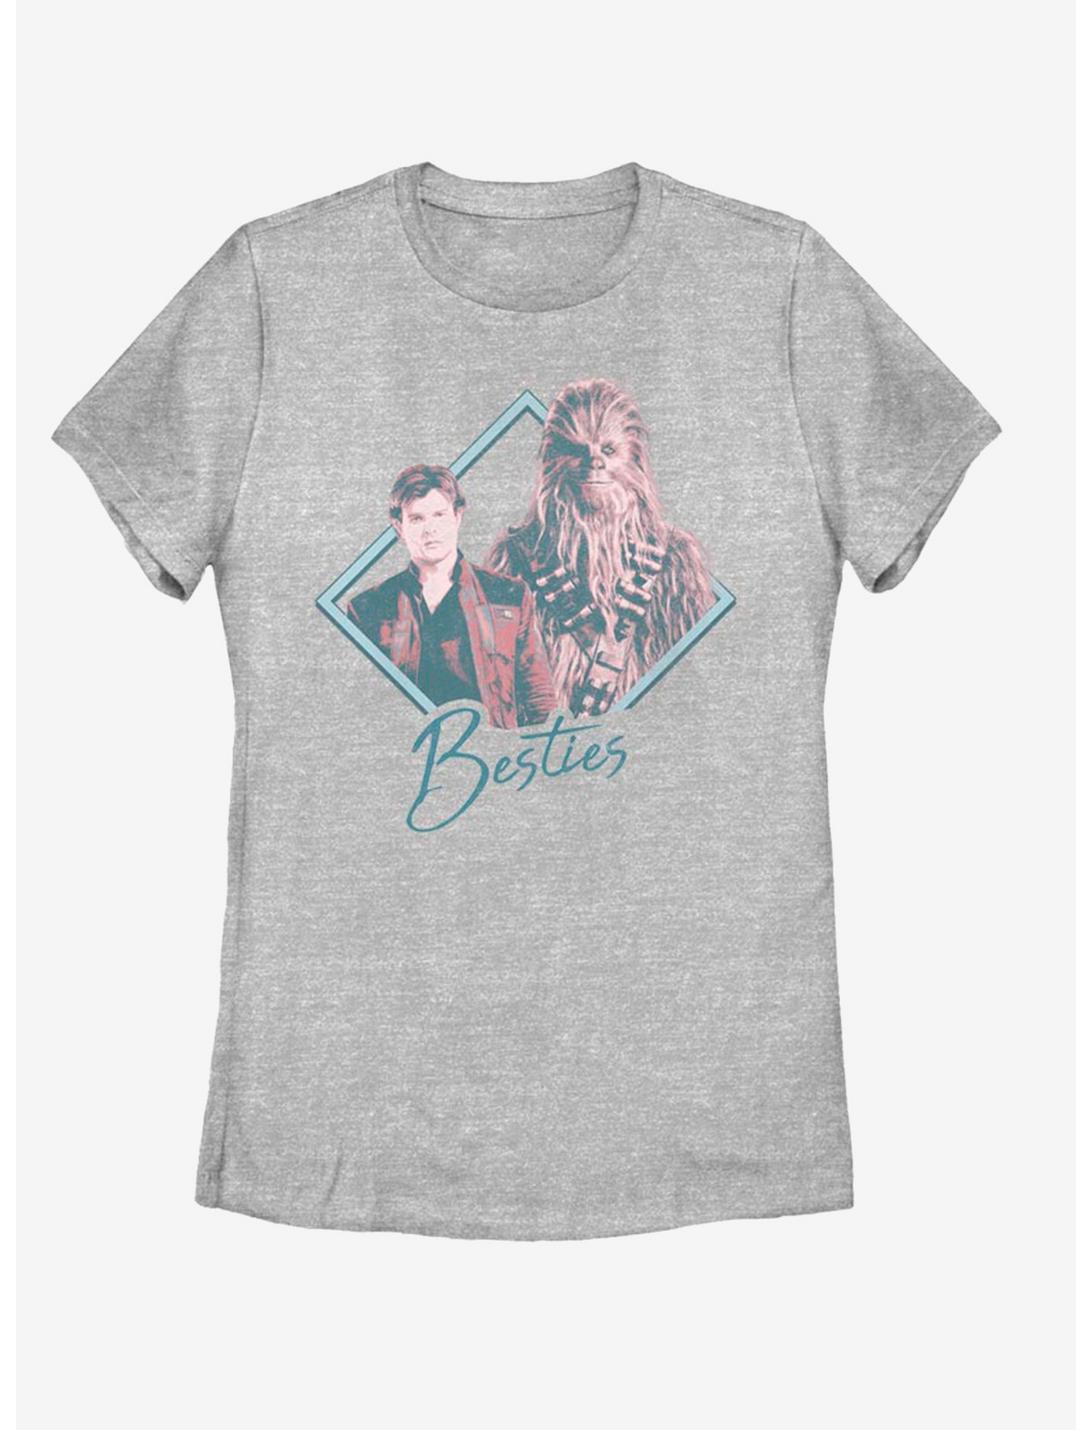 Solo: A Star Wars Story Besties Womens T-Shirt, ATH HTR, hi-res